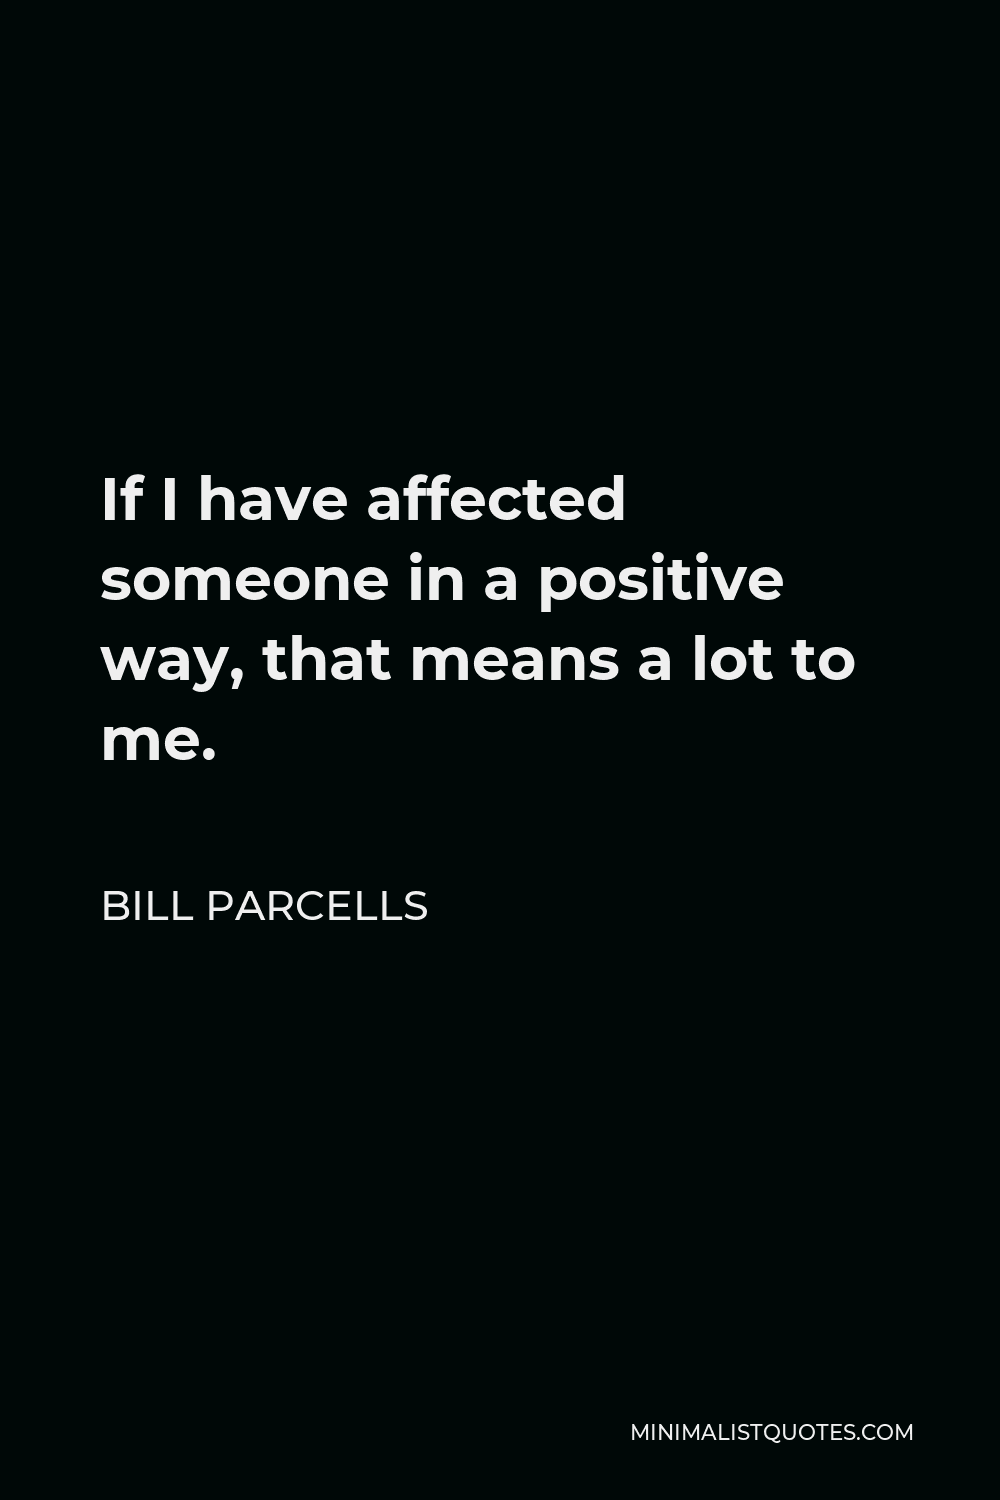 Bill Parcells Quote - If I have affected someone in a positive way, that means a lot to me.